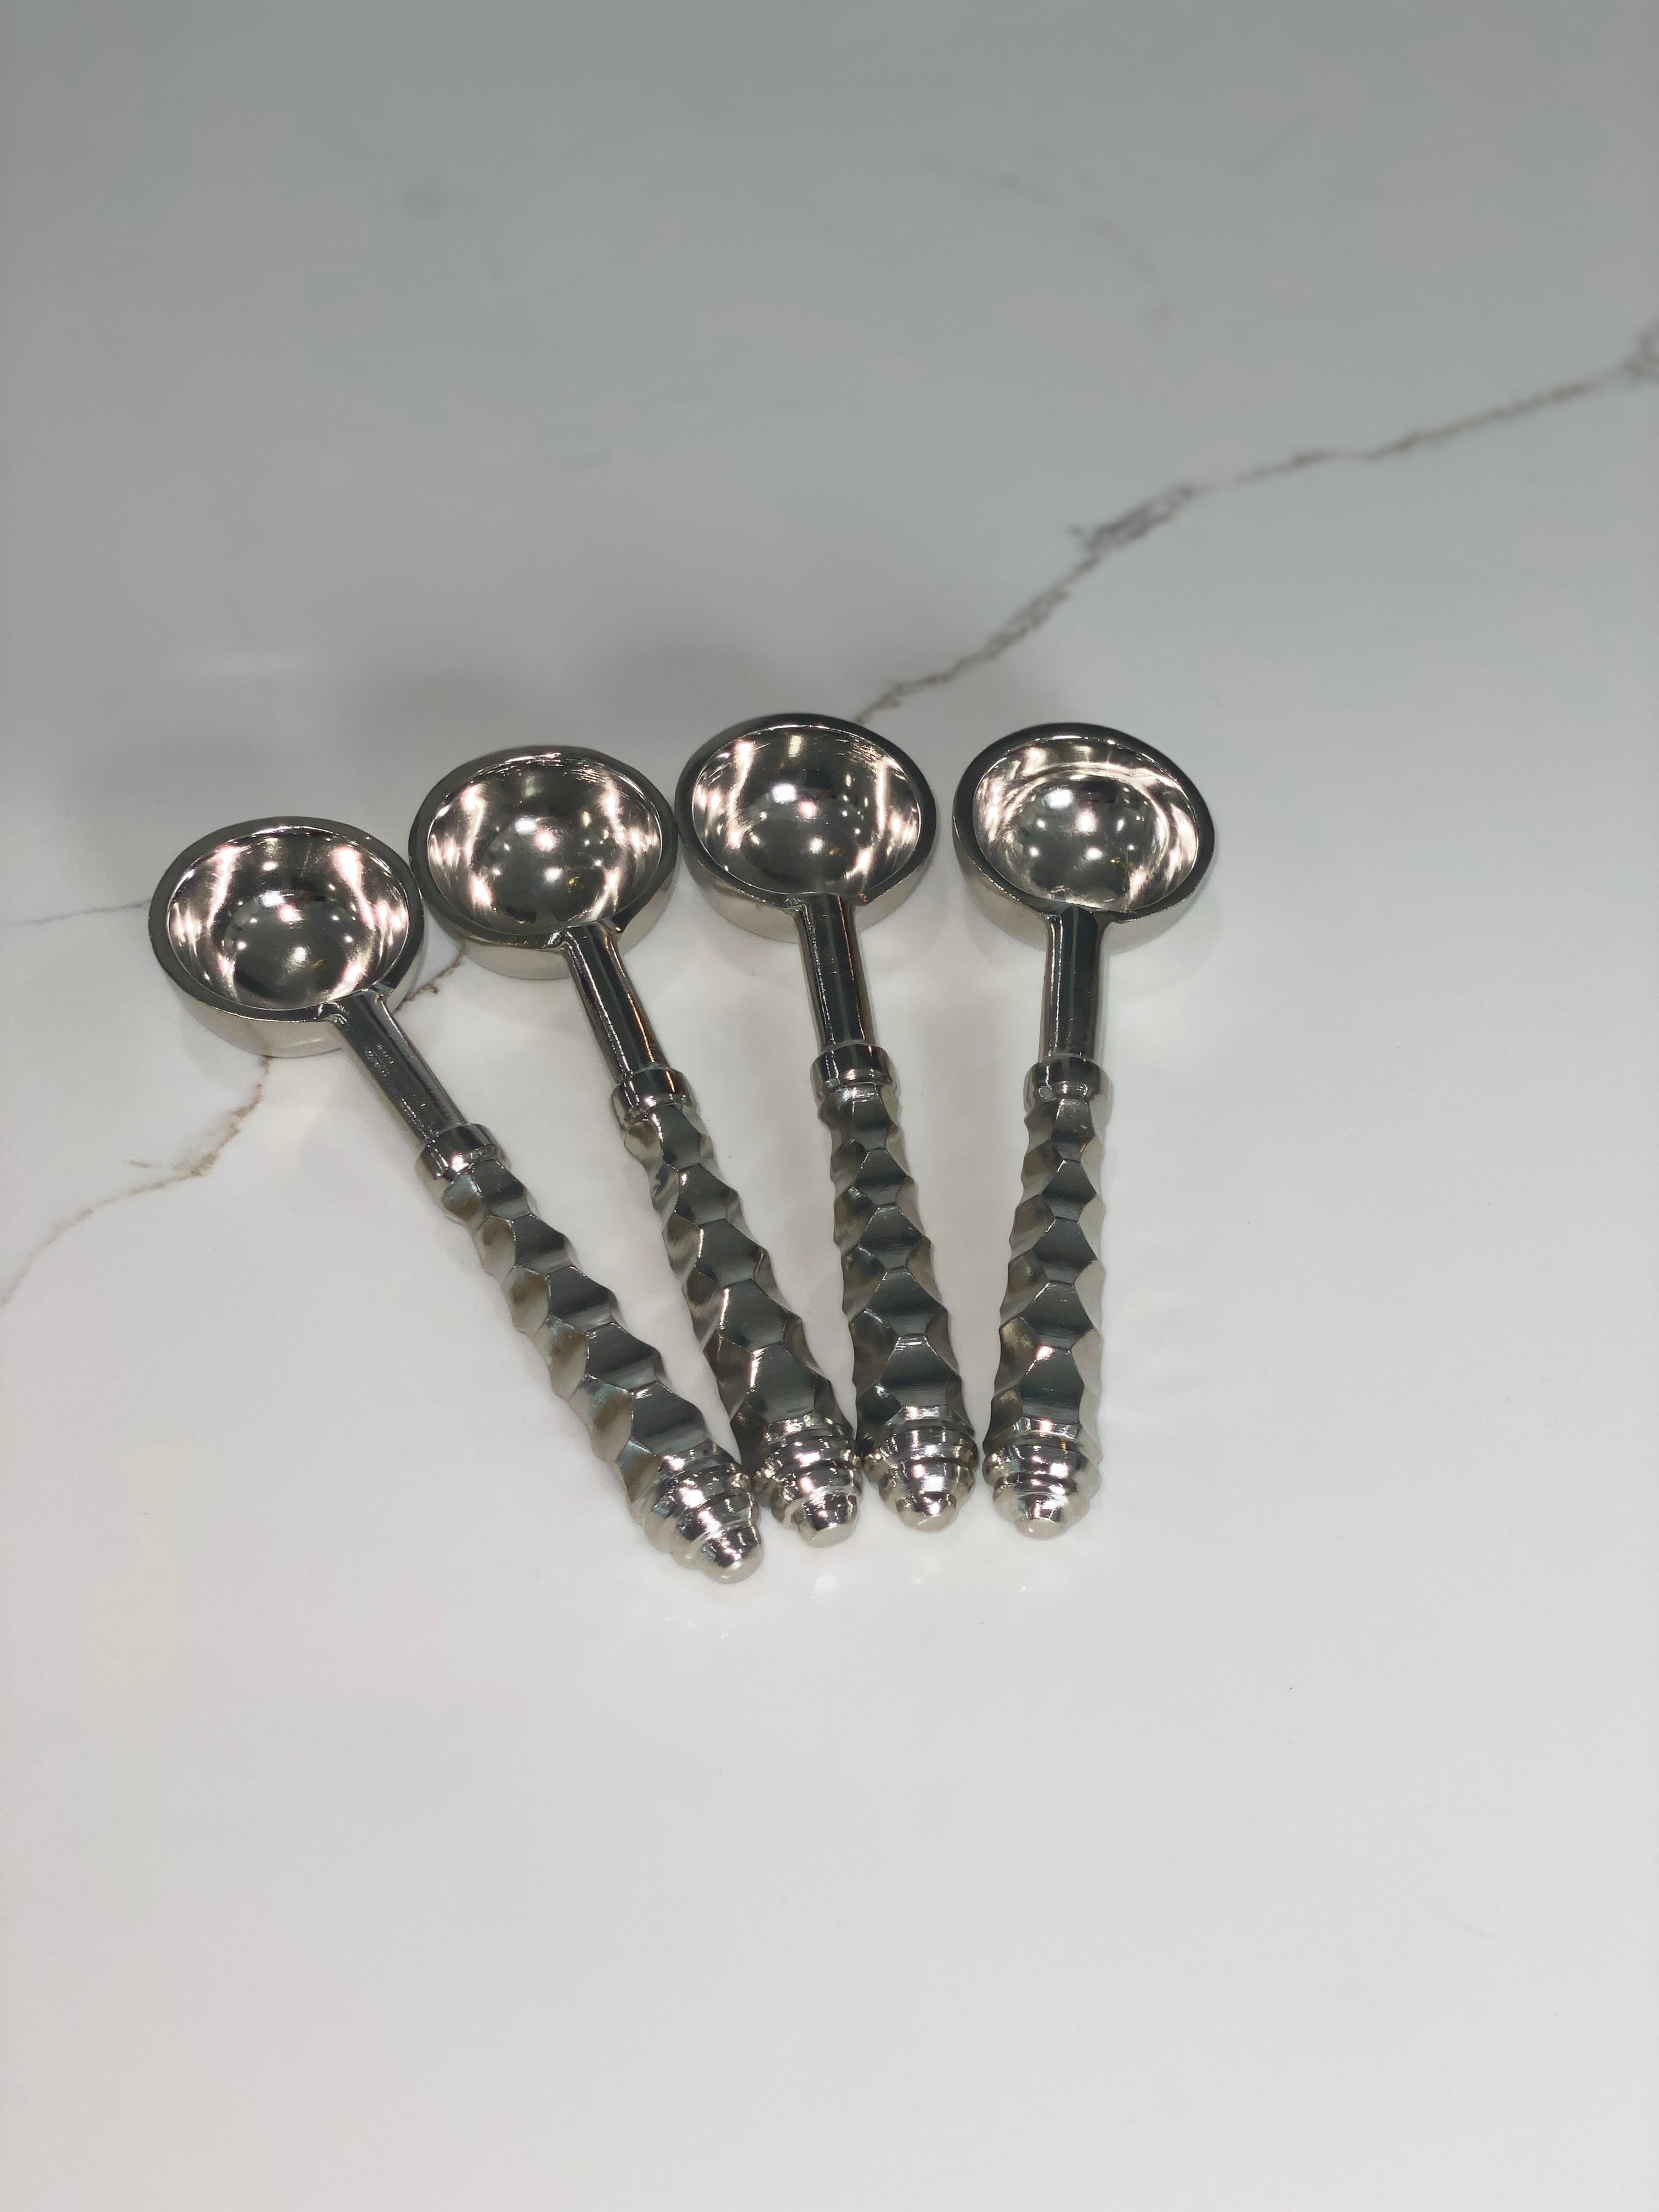 Silver hammered spoons